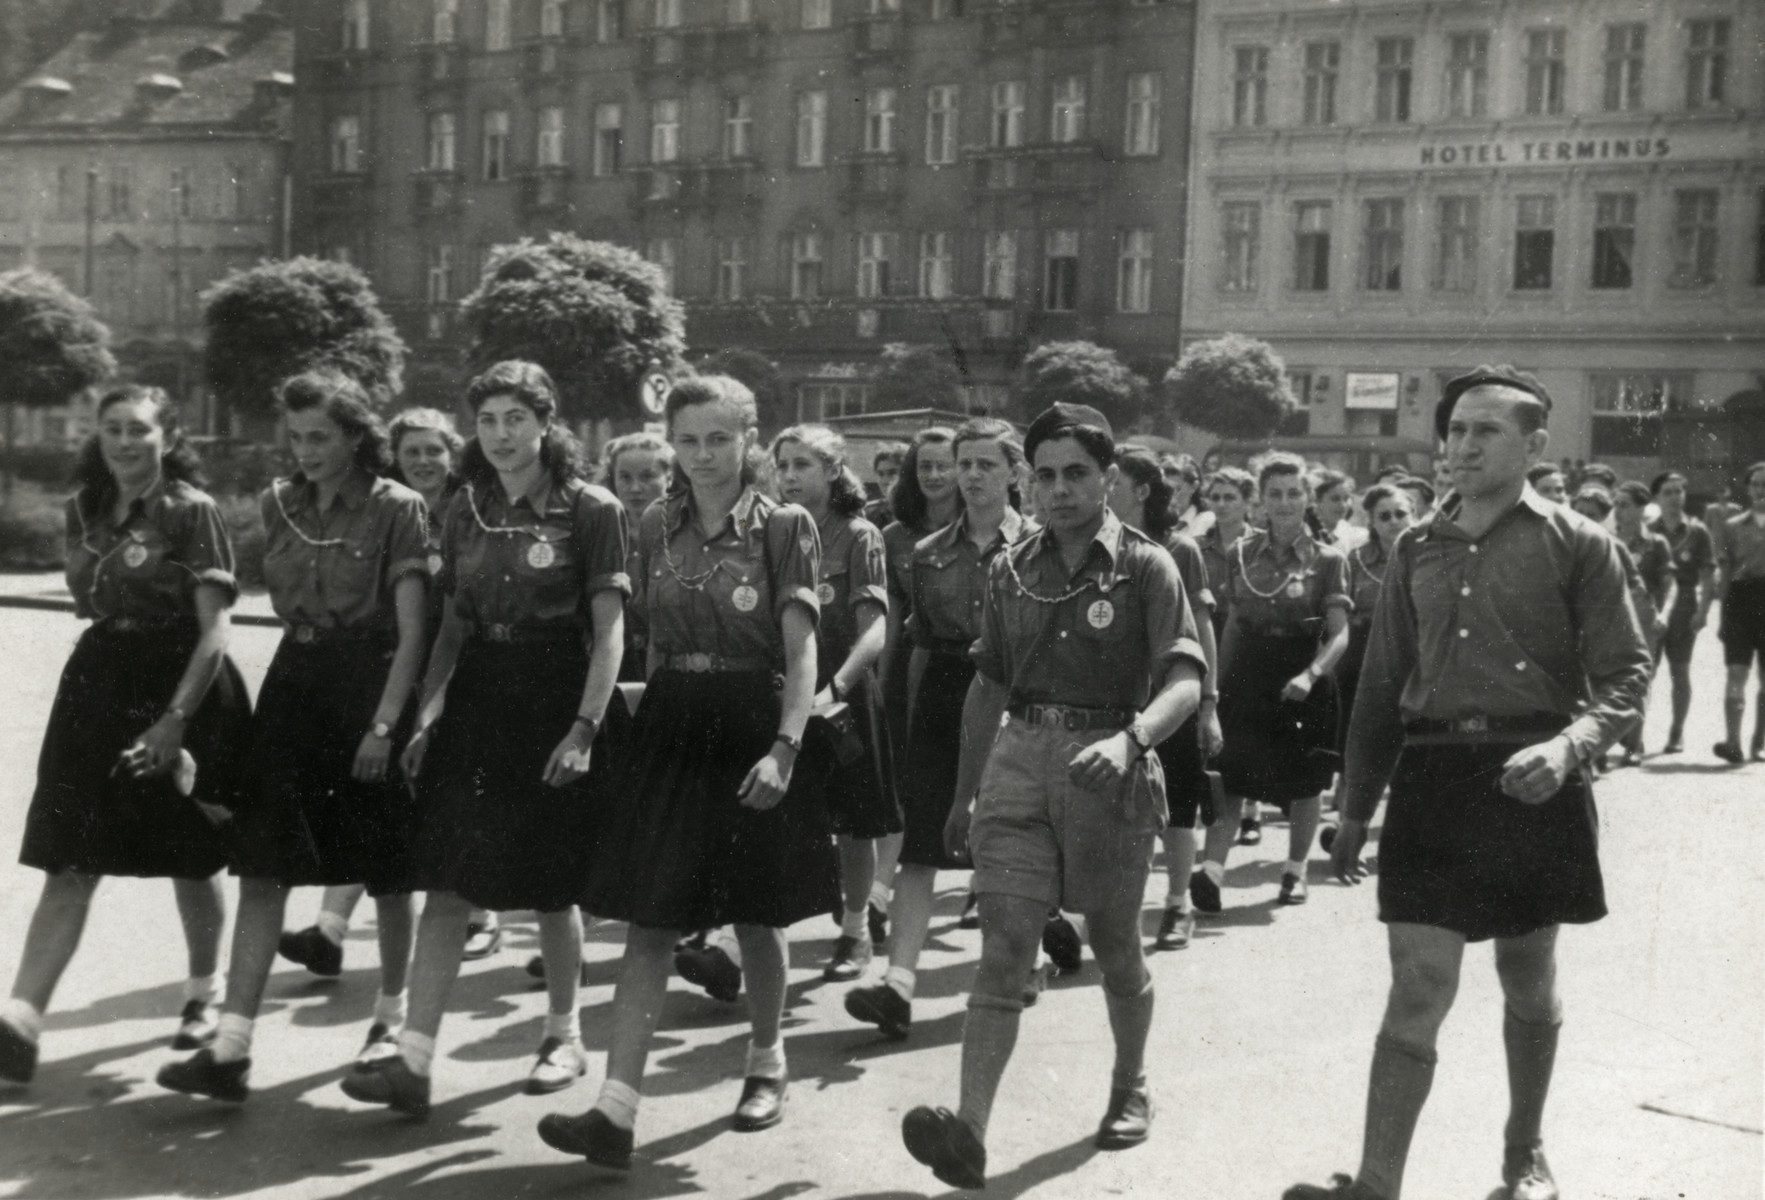 Zionist youth parade in Karlovy Vary. Collections Search United